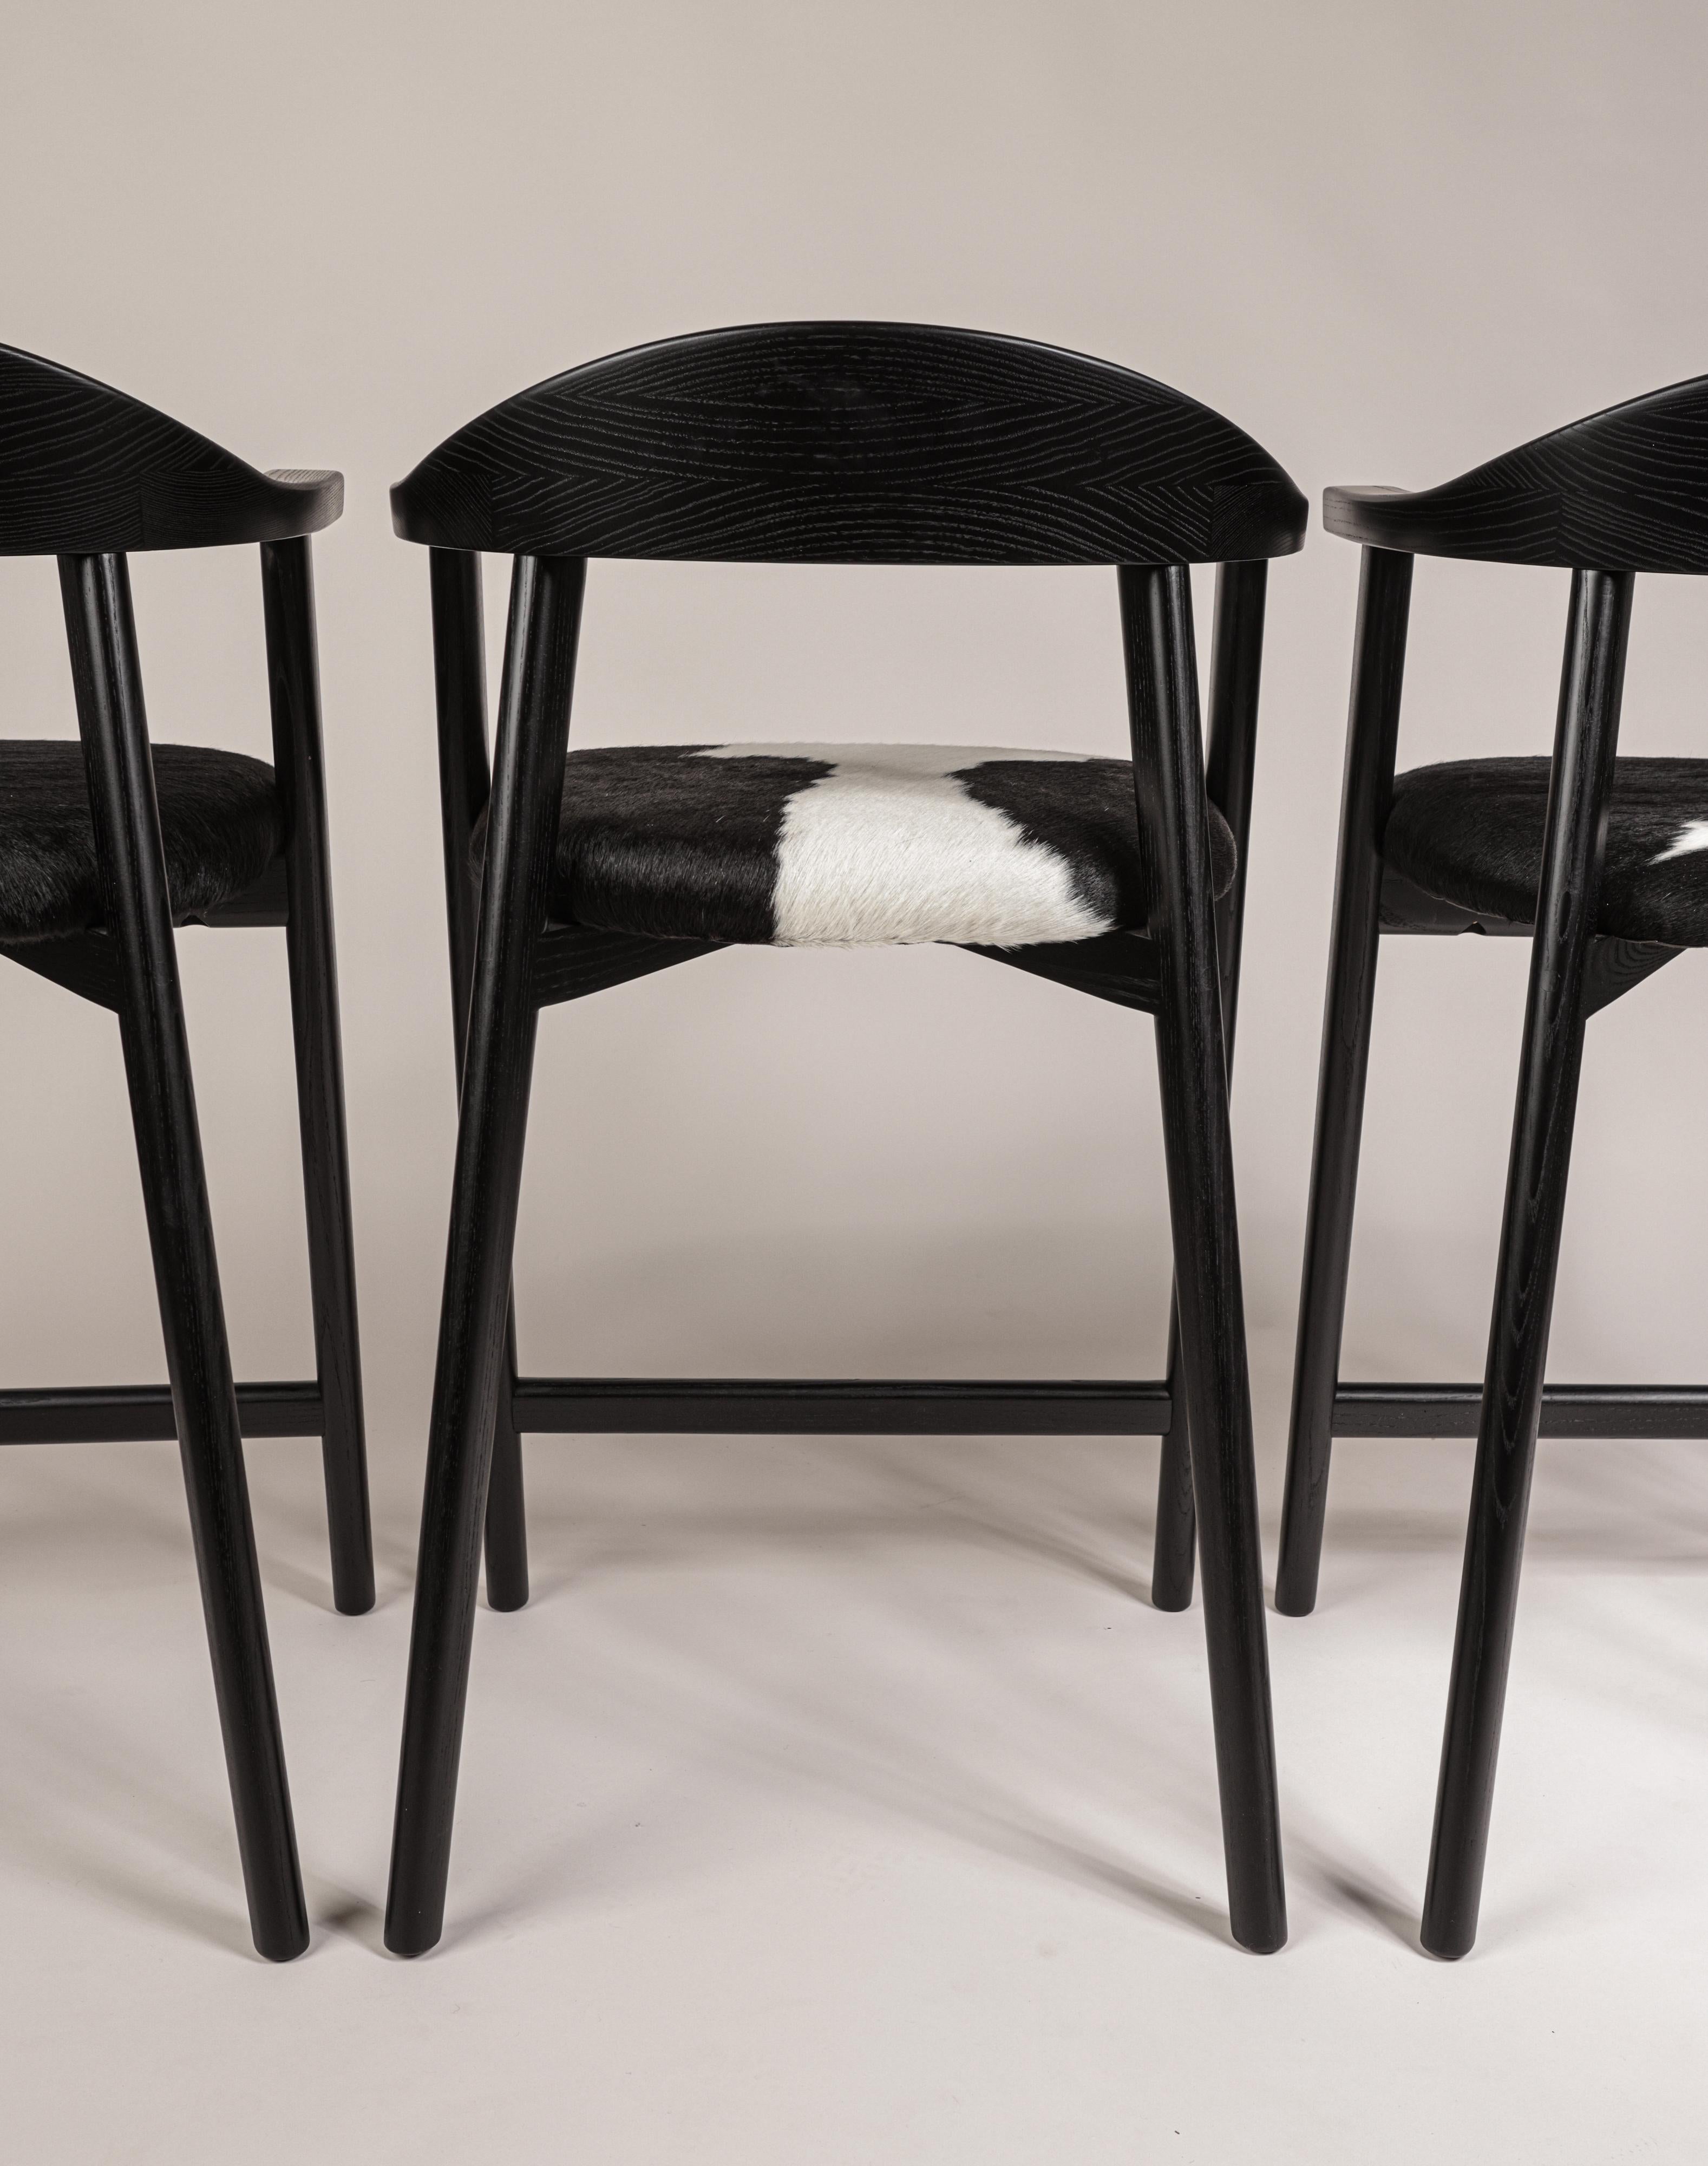 Karve counter stools in blackened Ash with black & white cowhide upholstery. A classic design, elegant and lightweight in form, handcrafted to last generations. 
This set of four counter stools is available for immediate shipment as pictured.